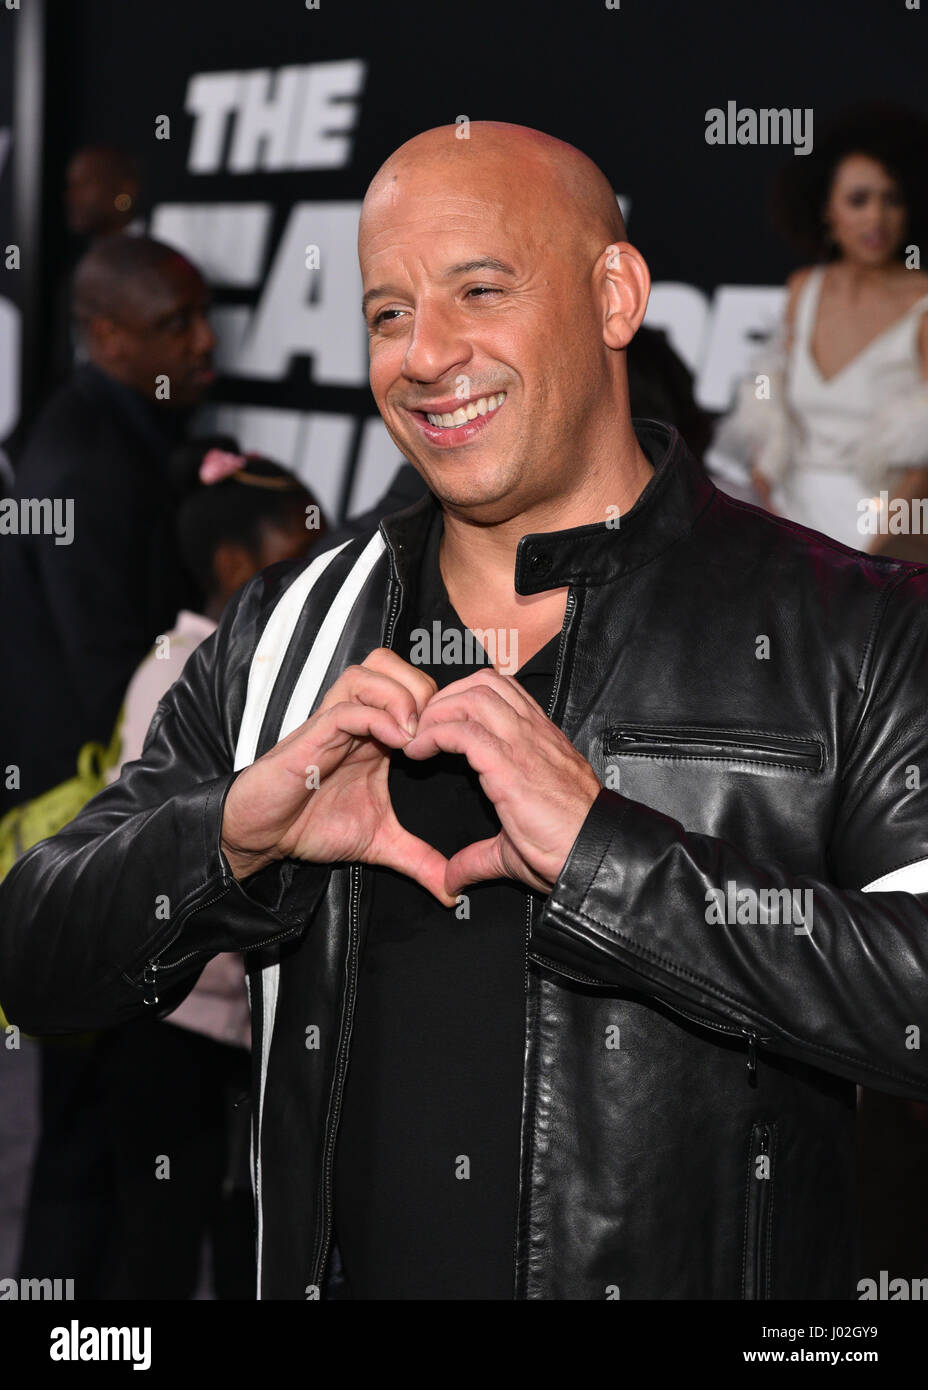 New York, USA. 8th April, 2017. Vin Diesel attends 'The Fate Of The Furious' New York Premiere at Radio City Music Hall on April 8, 2017 in New York City. credit: Erik Pendzich Credit: Erik Pendzich/Alamy Live News Stock Photo